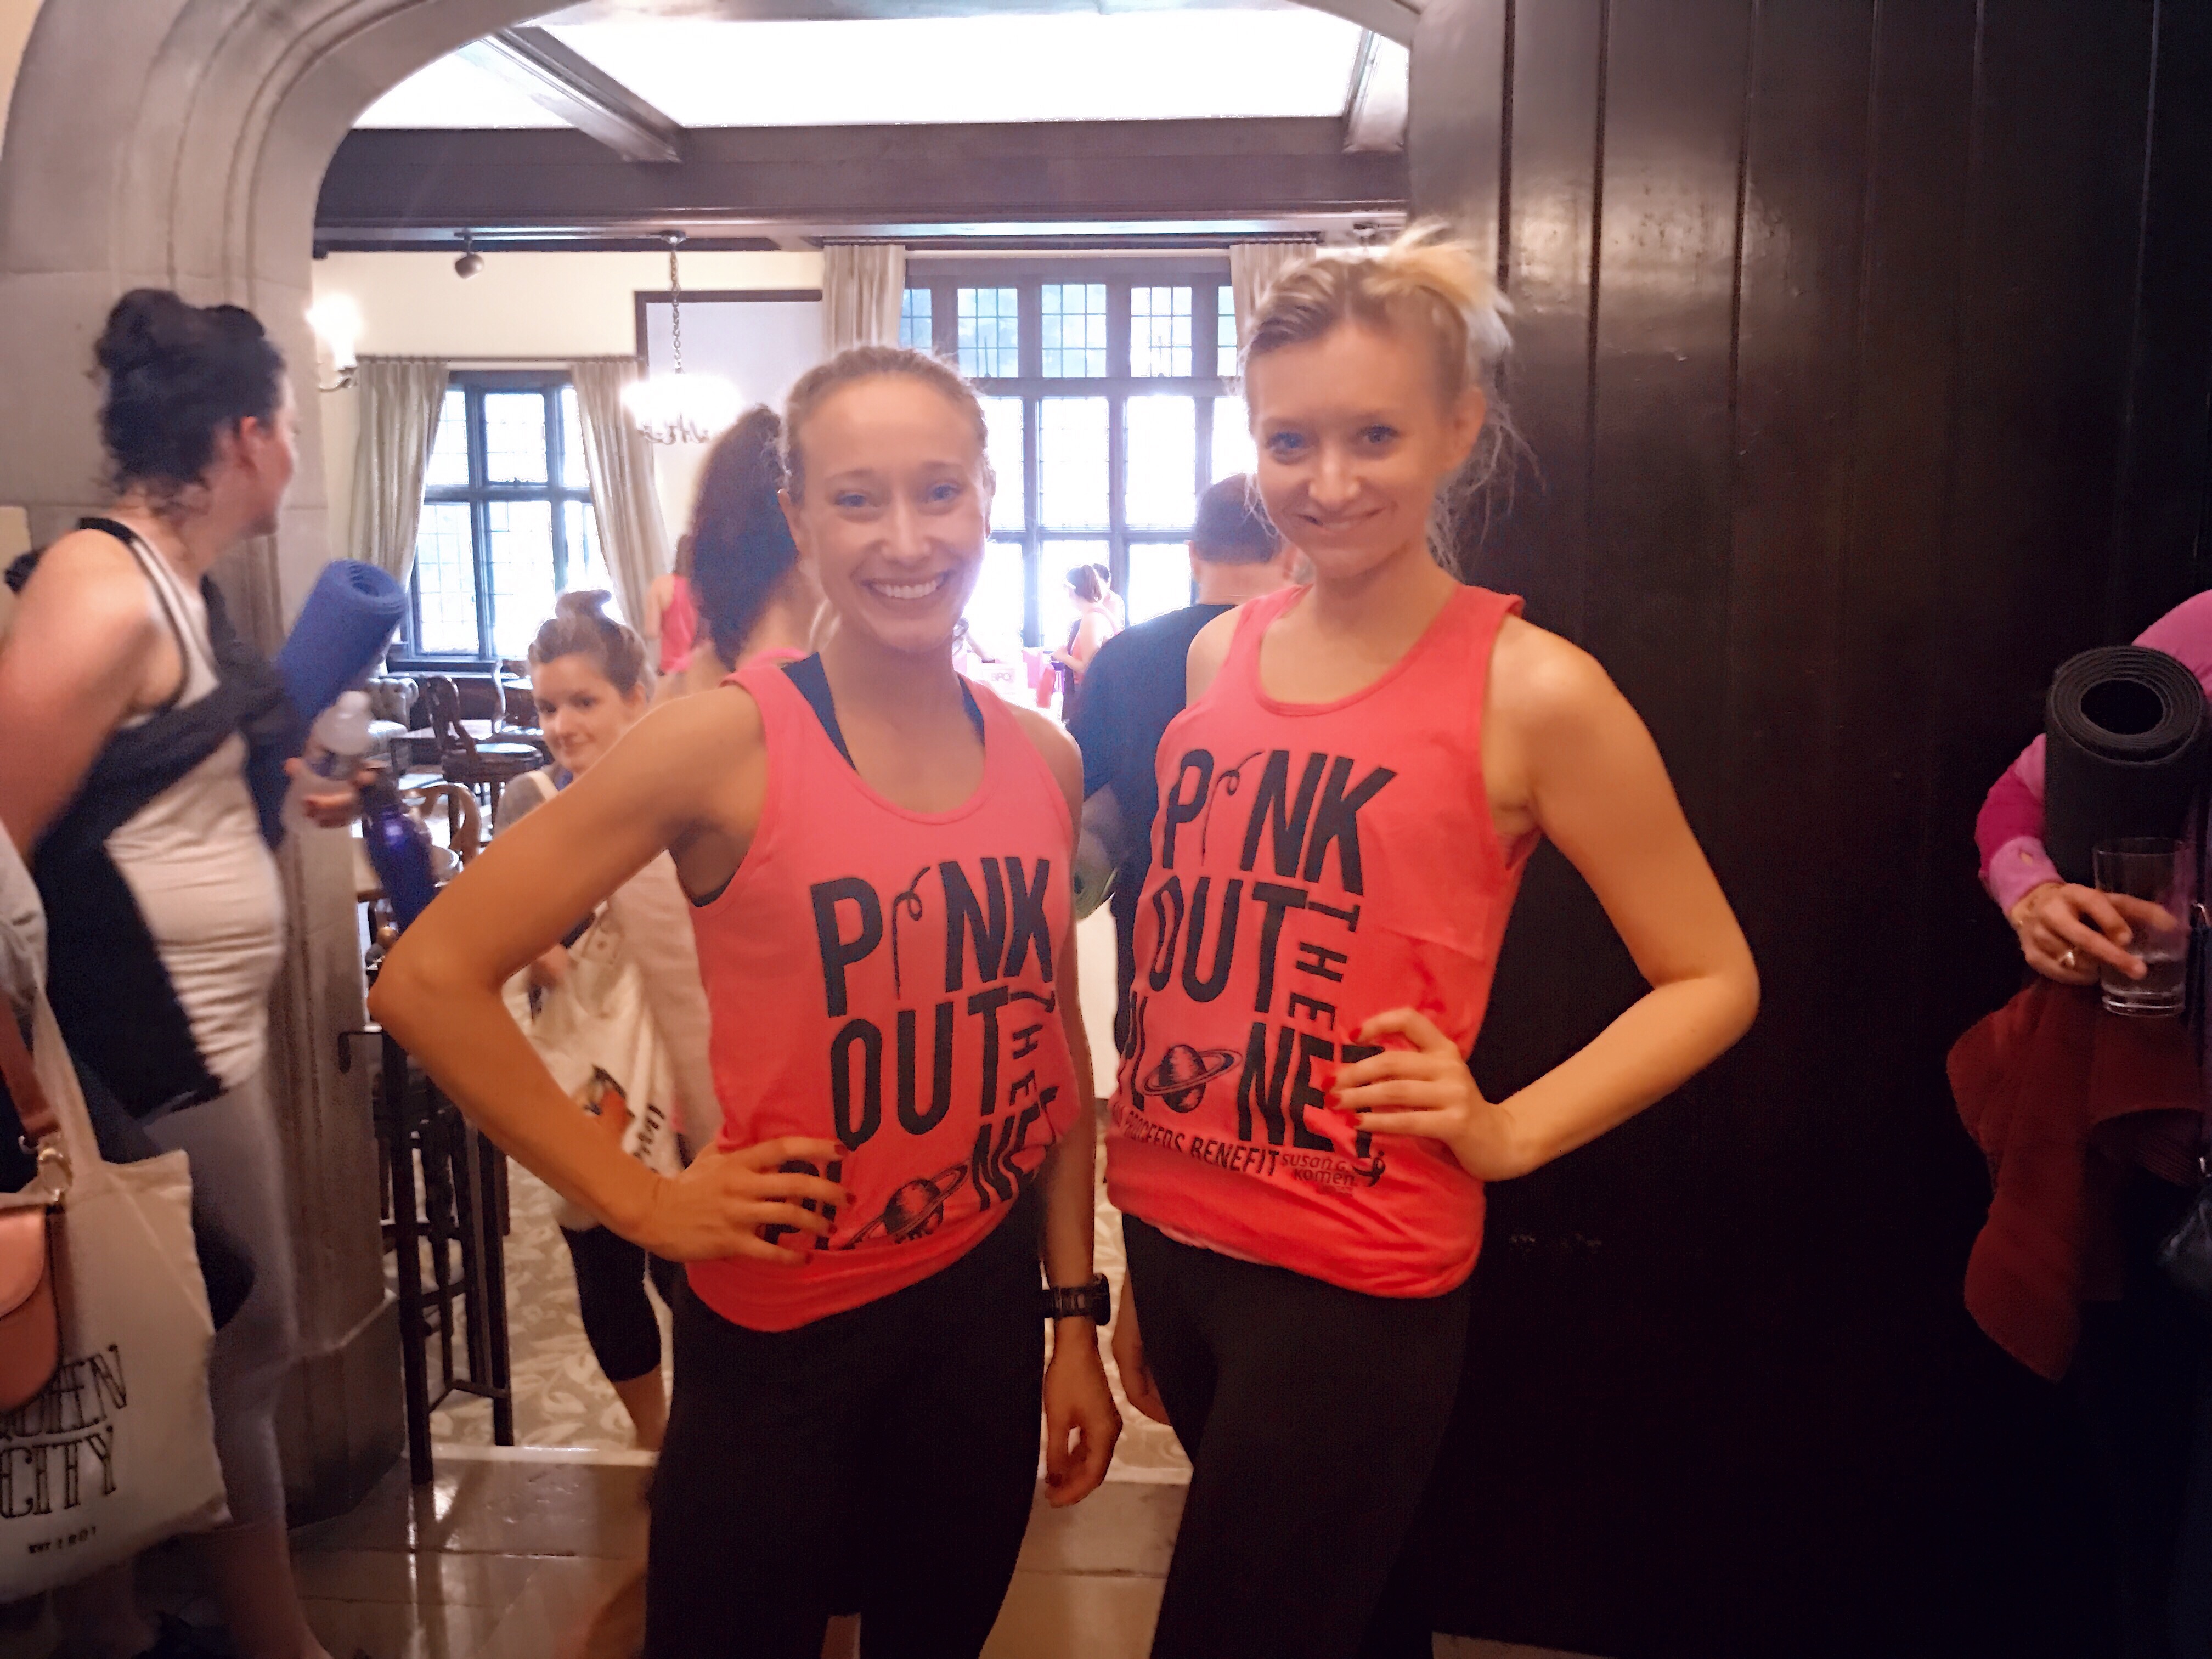 Club Pilates - Join us in supporting the Susan G Komen foundation! For  every set of pink straps we sell between now and the end of October, we  will donate 100% of